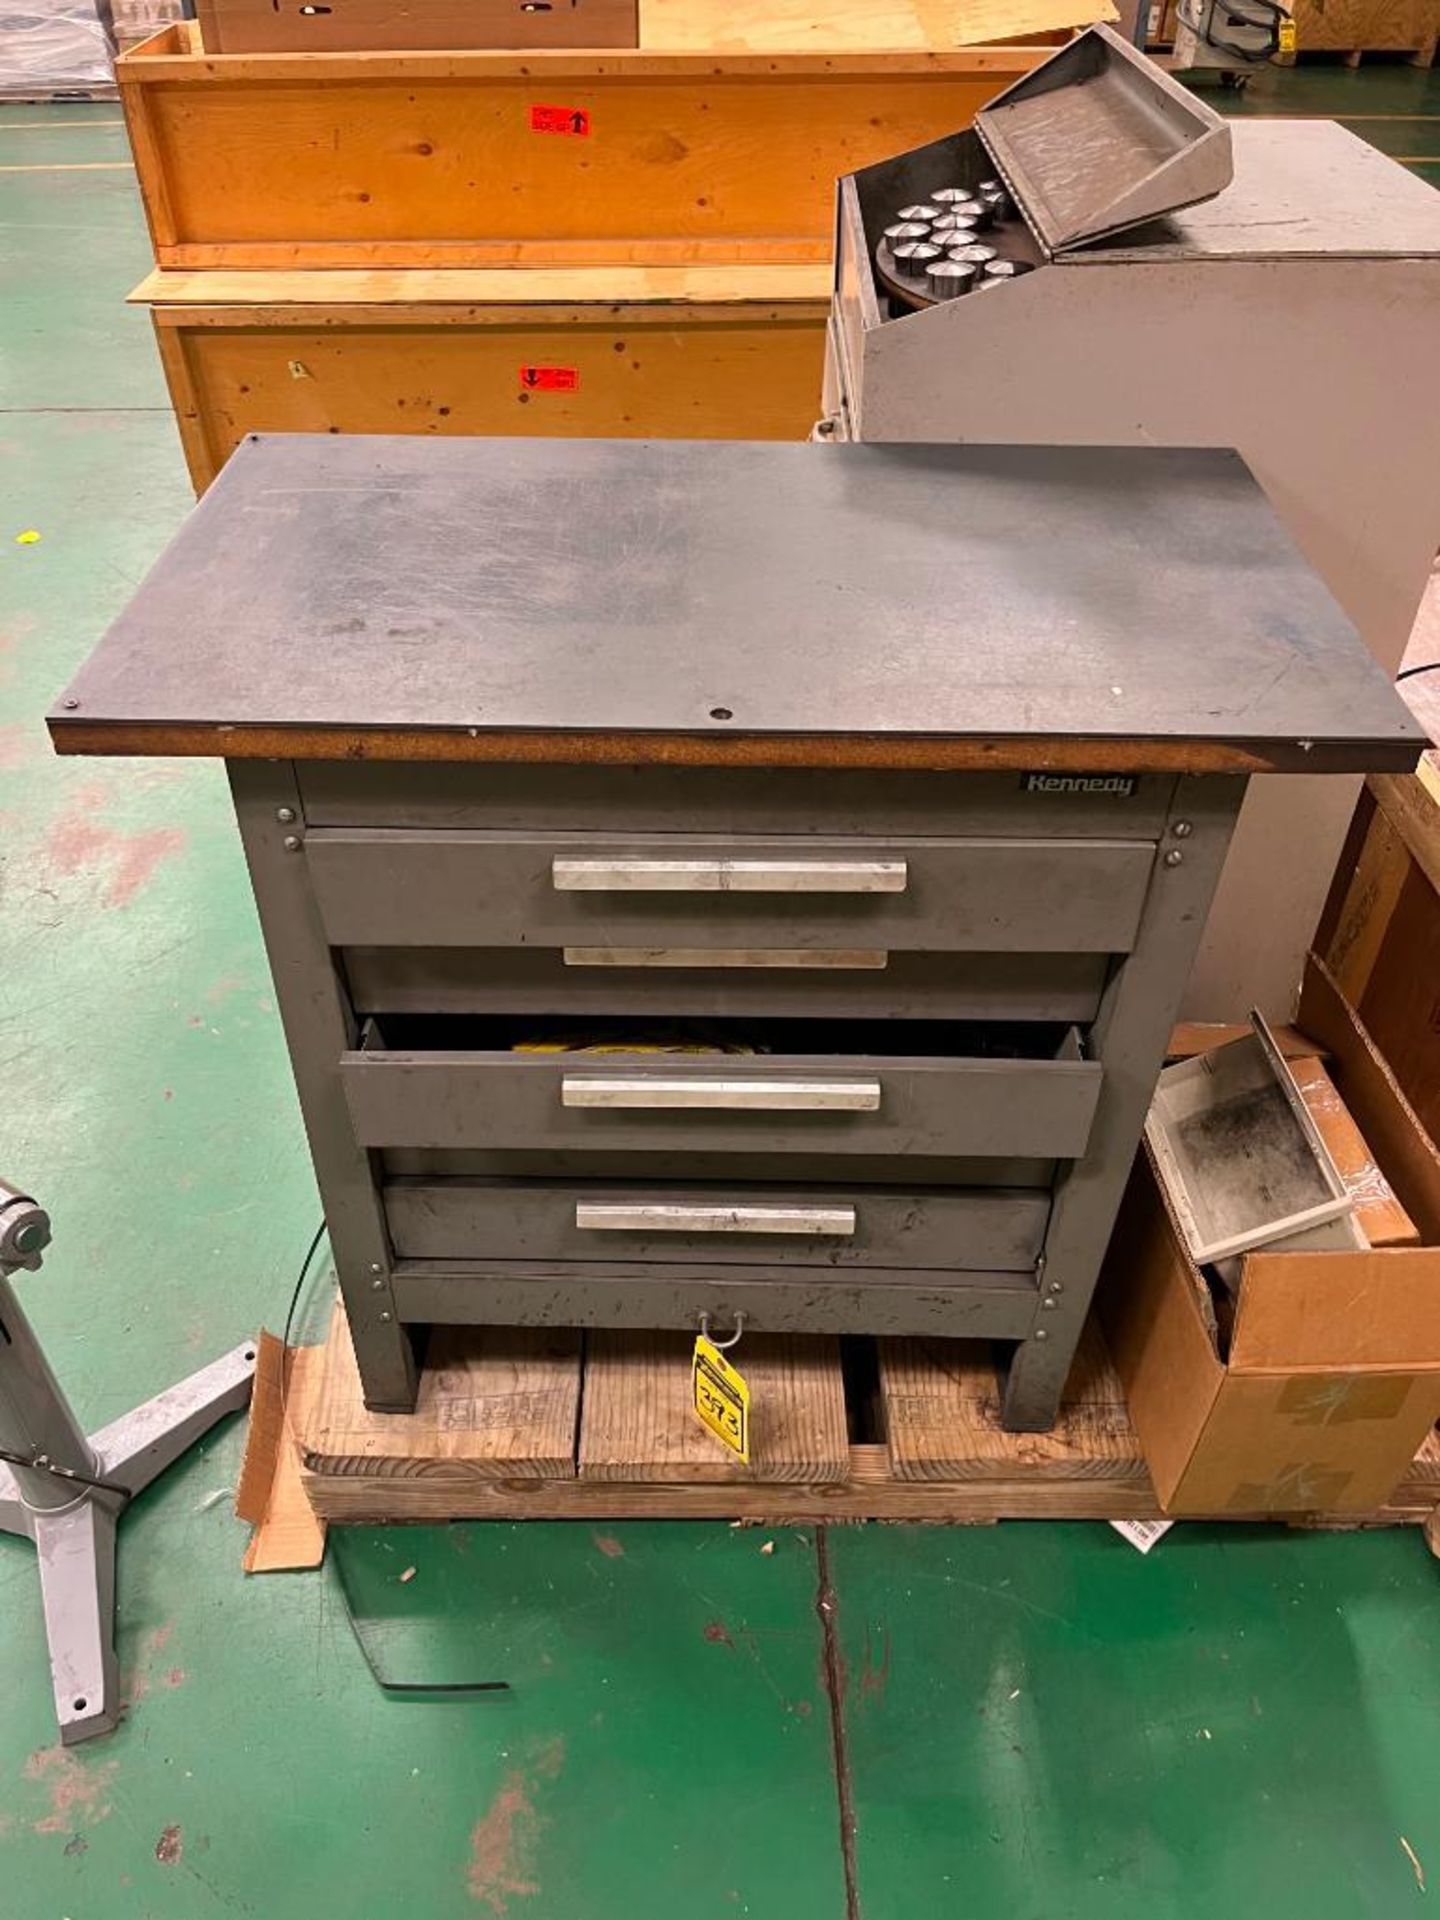 Kennedy 5-Drawer Bench Cabinet w/ Hold-down Equipment & Roller Stand, 23" - 38-1/2", 1,760 LB. Capac - Image 2 of 4